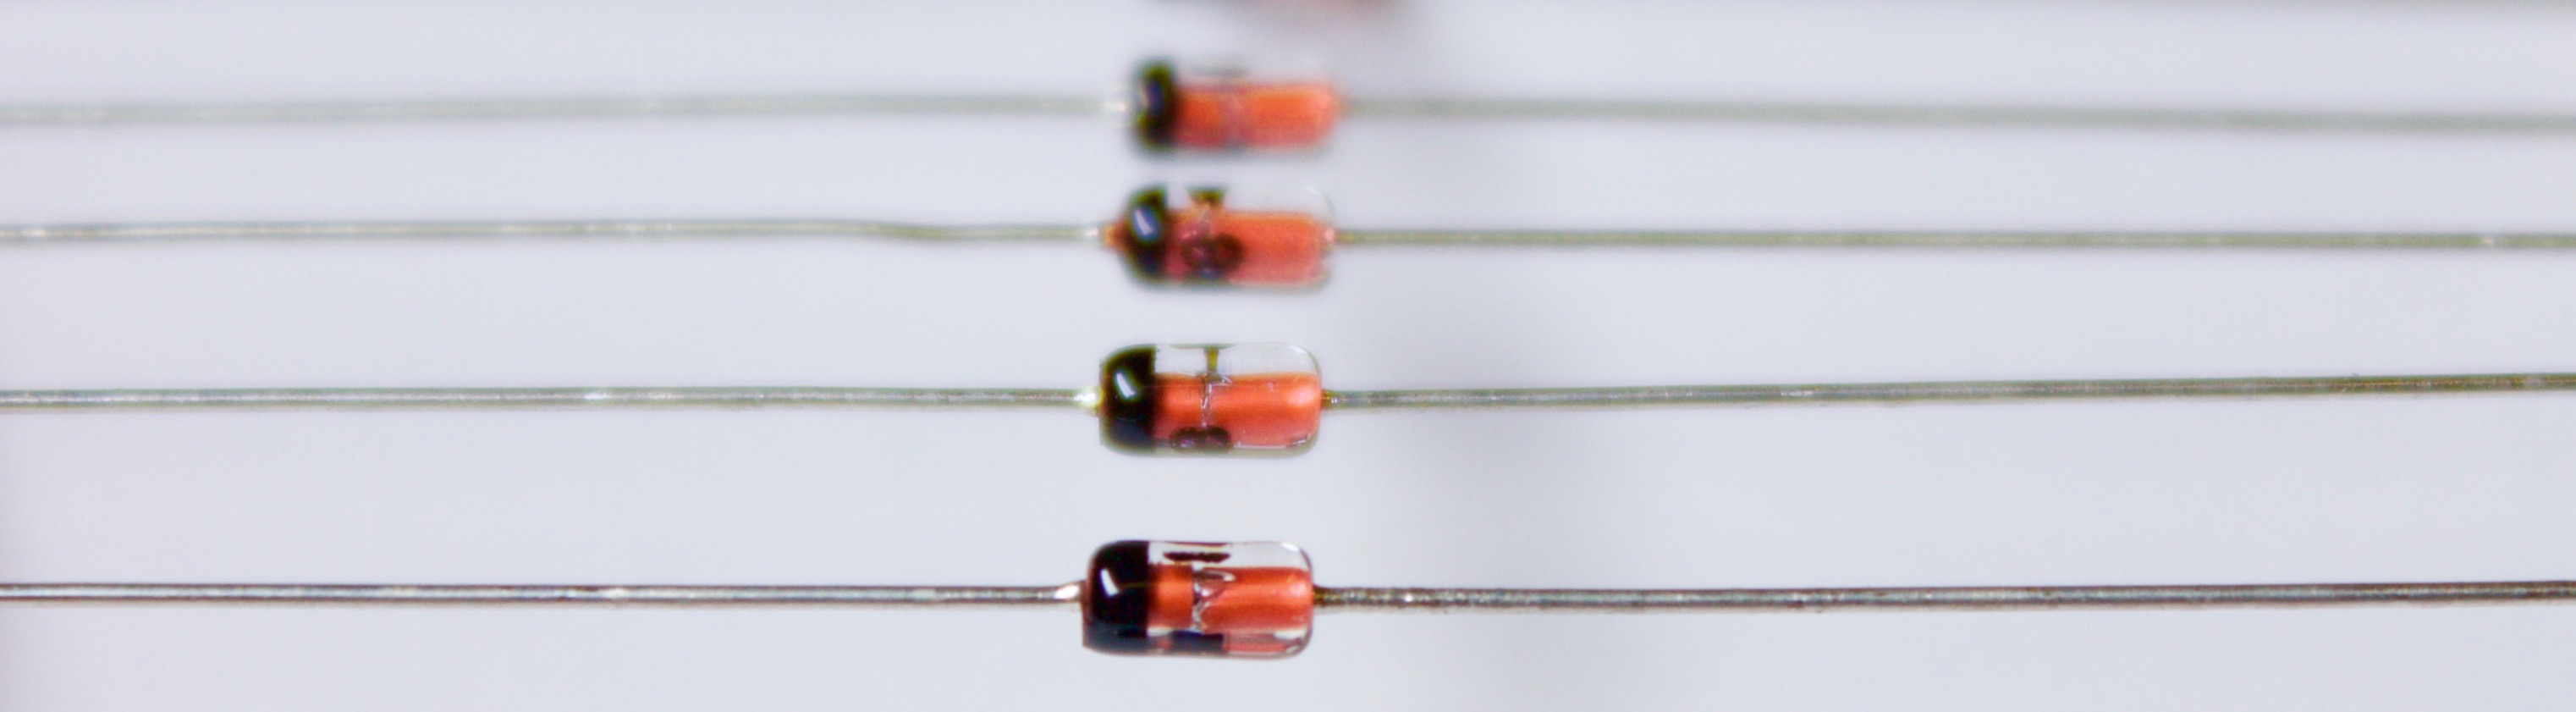 Diodes in axial glass pagkage